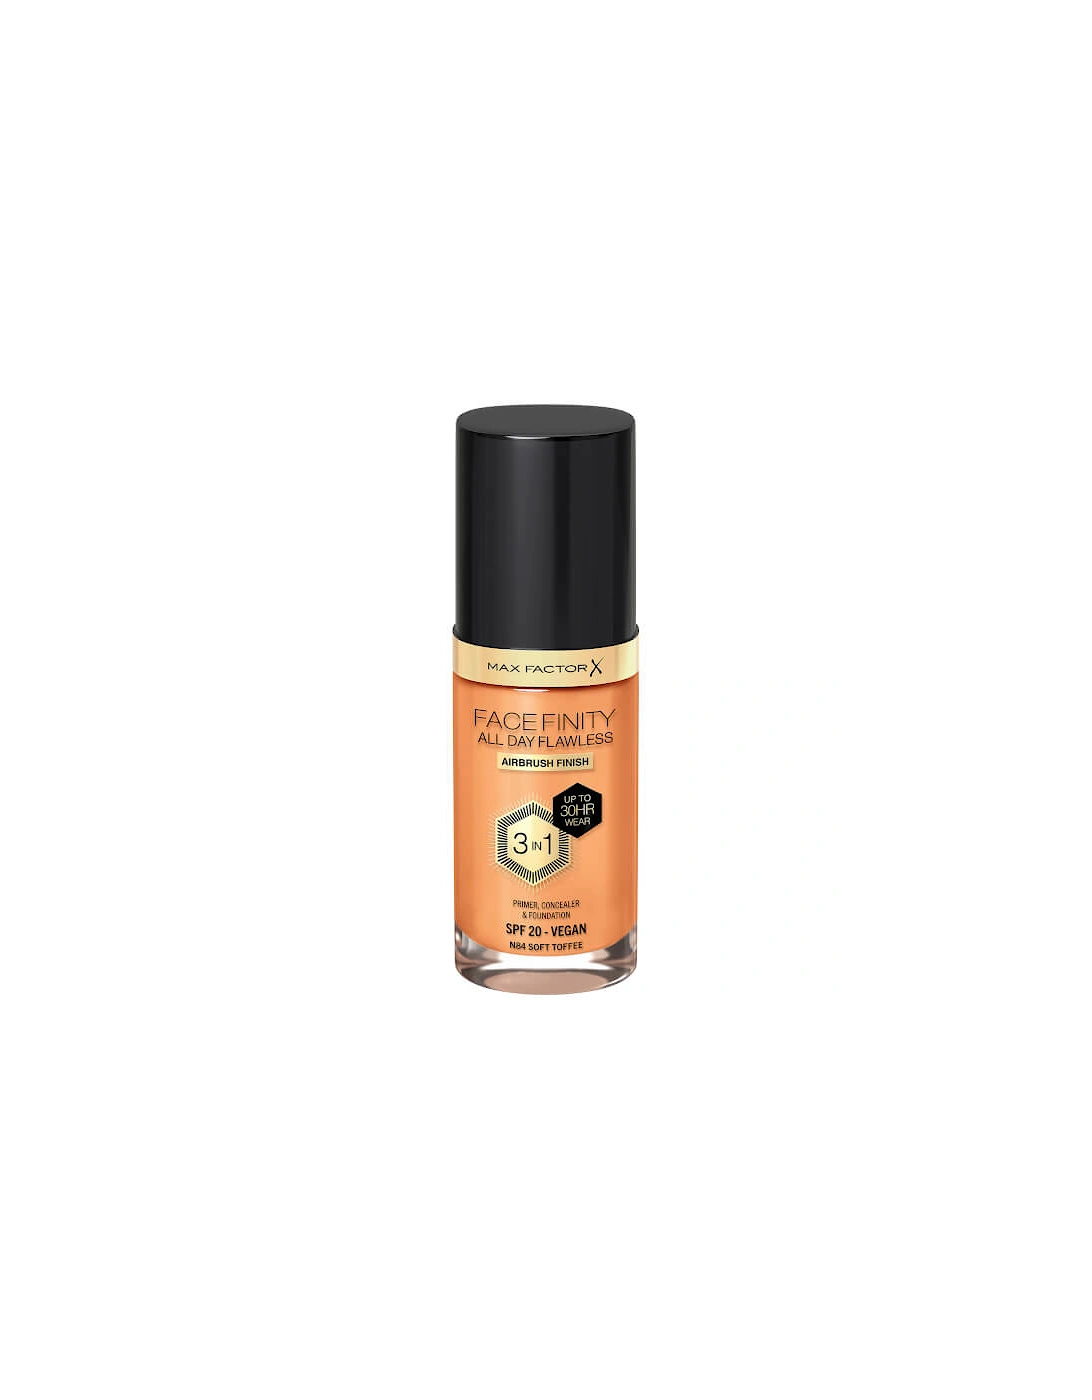 Facefinity All Day Flawless 3 in 1 Vegan Foundation - N84 Soft Toffee, 2 of 1